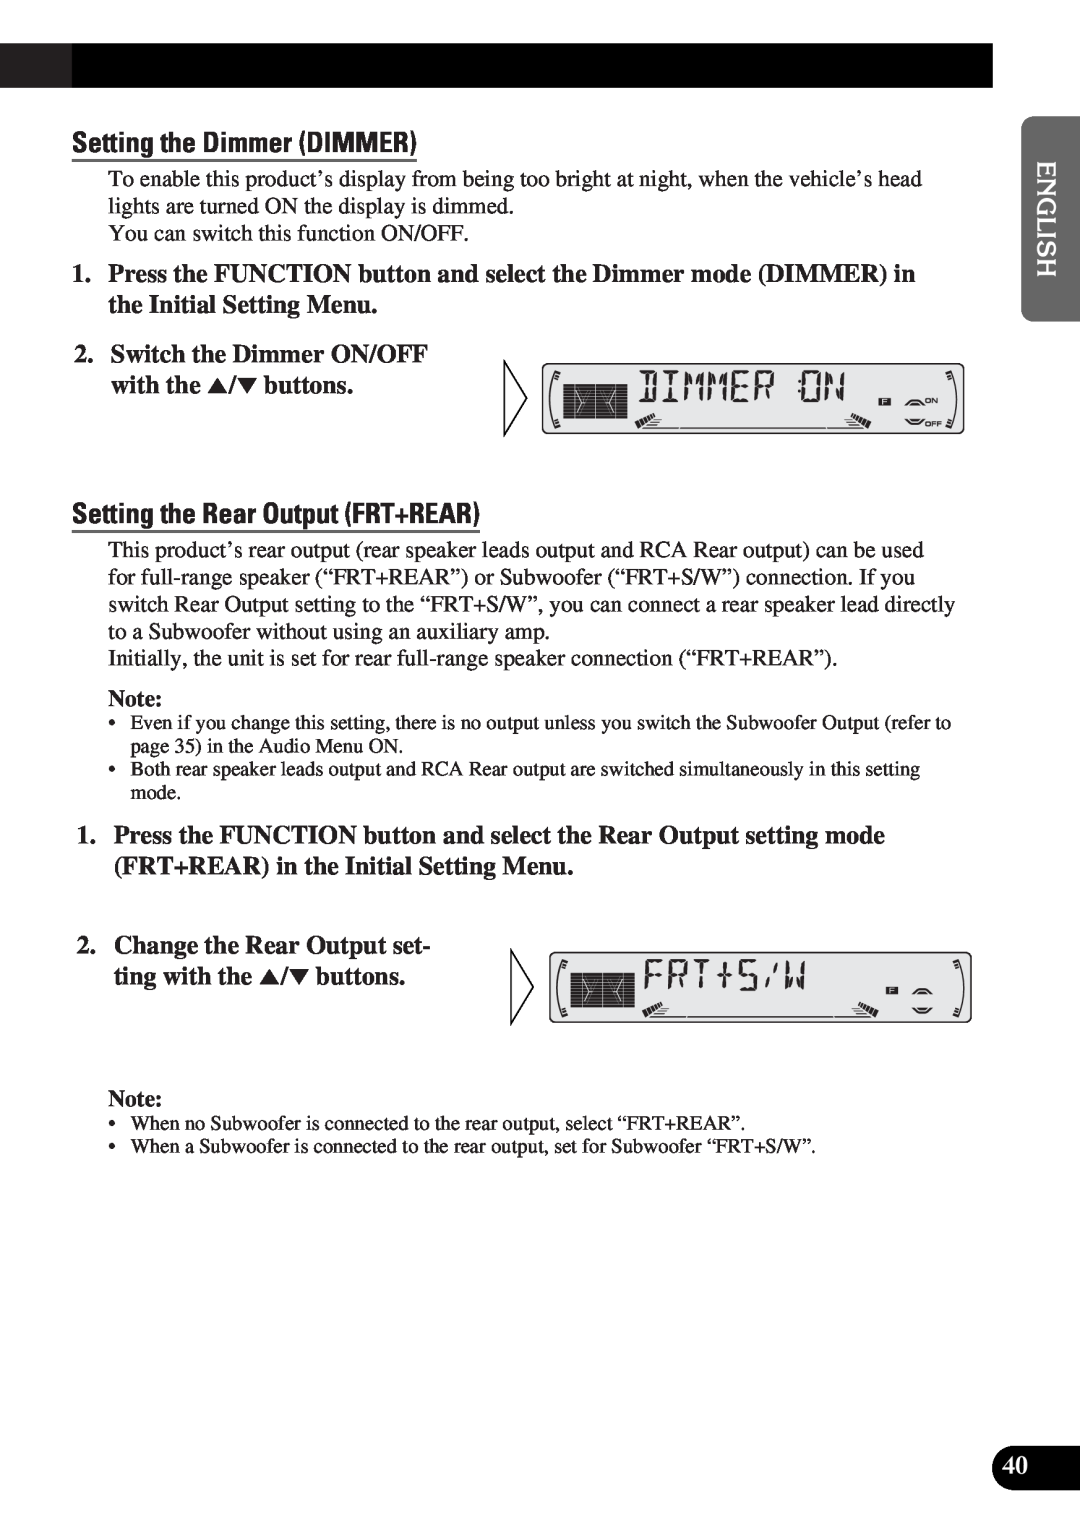 Pioneer DEH-P4300 operation manual Setting the Dimmer DIMMER, Setting the Rear Output FRT+REAR, Change the Rear Output set 